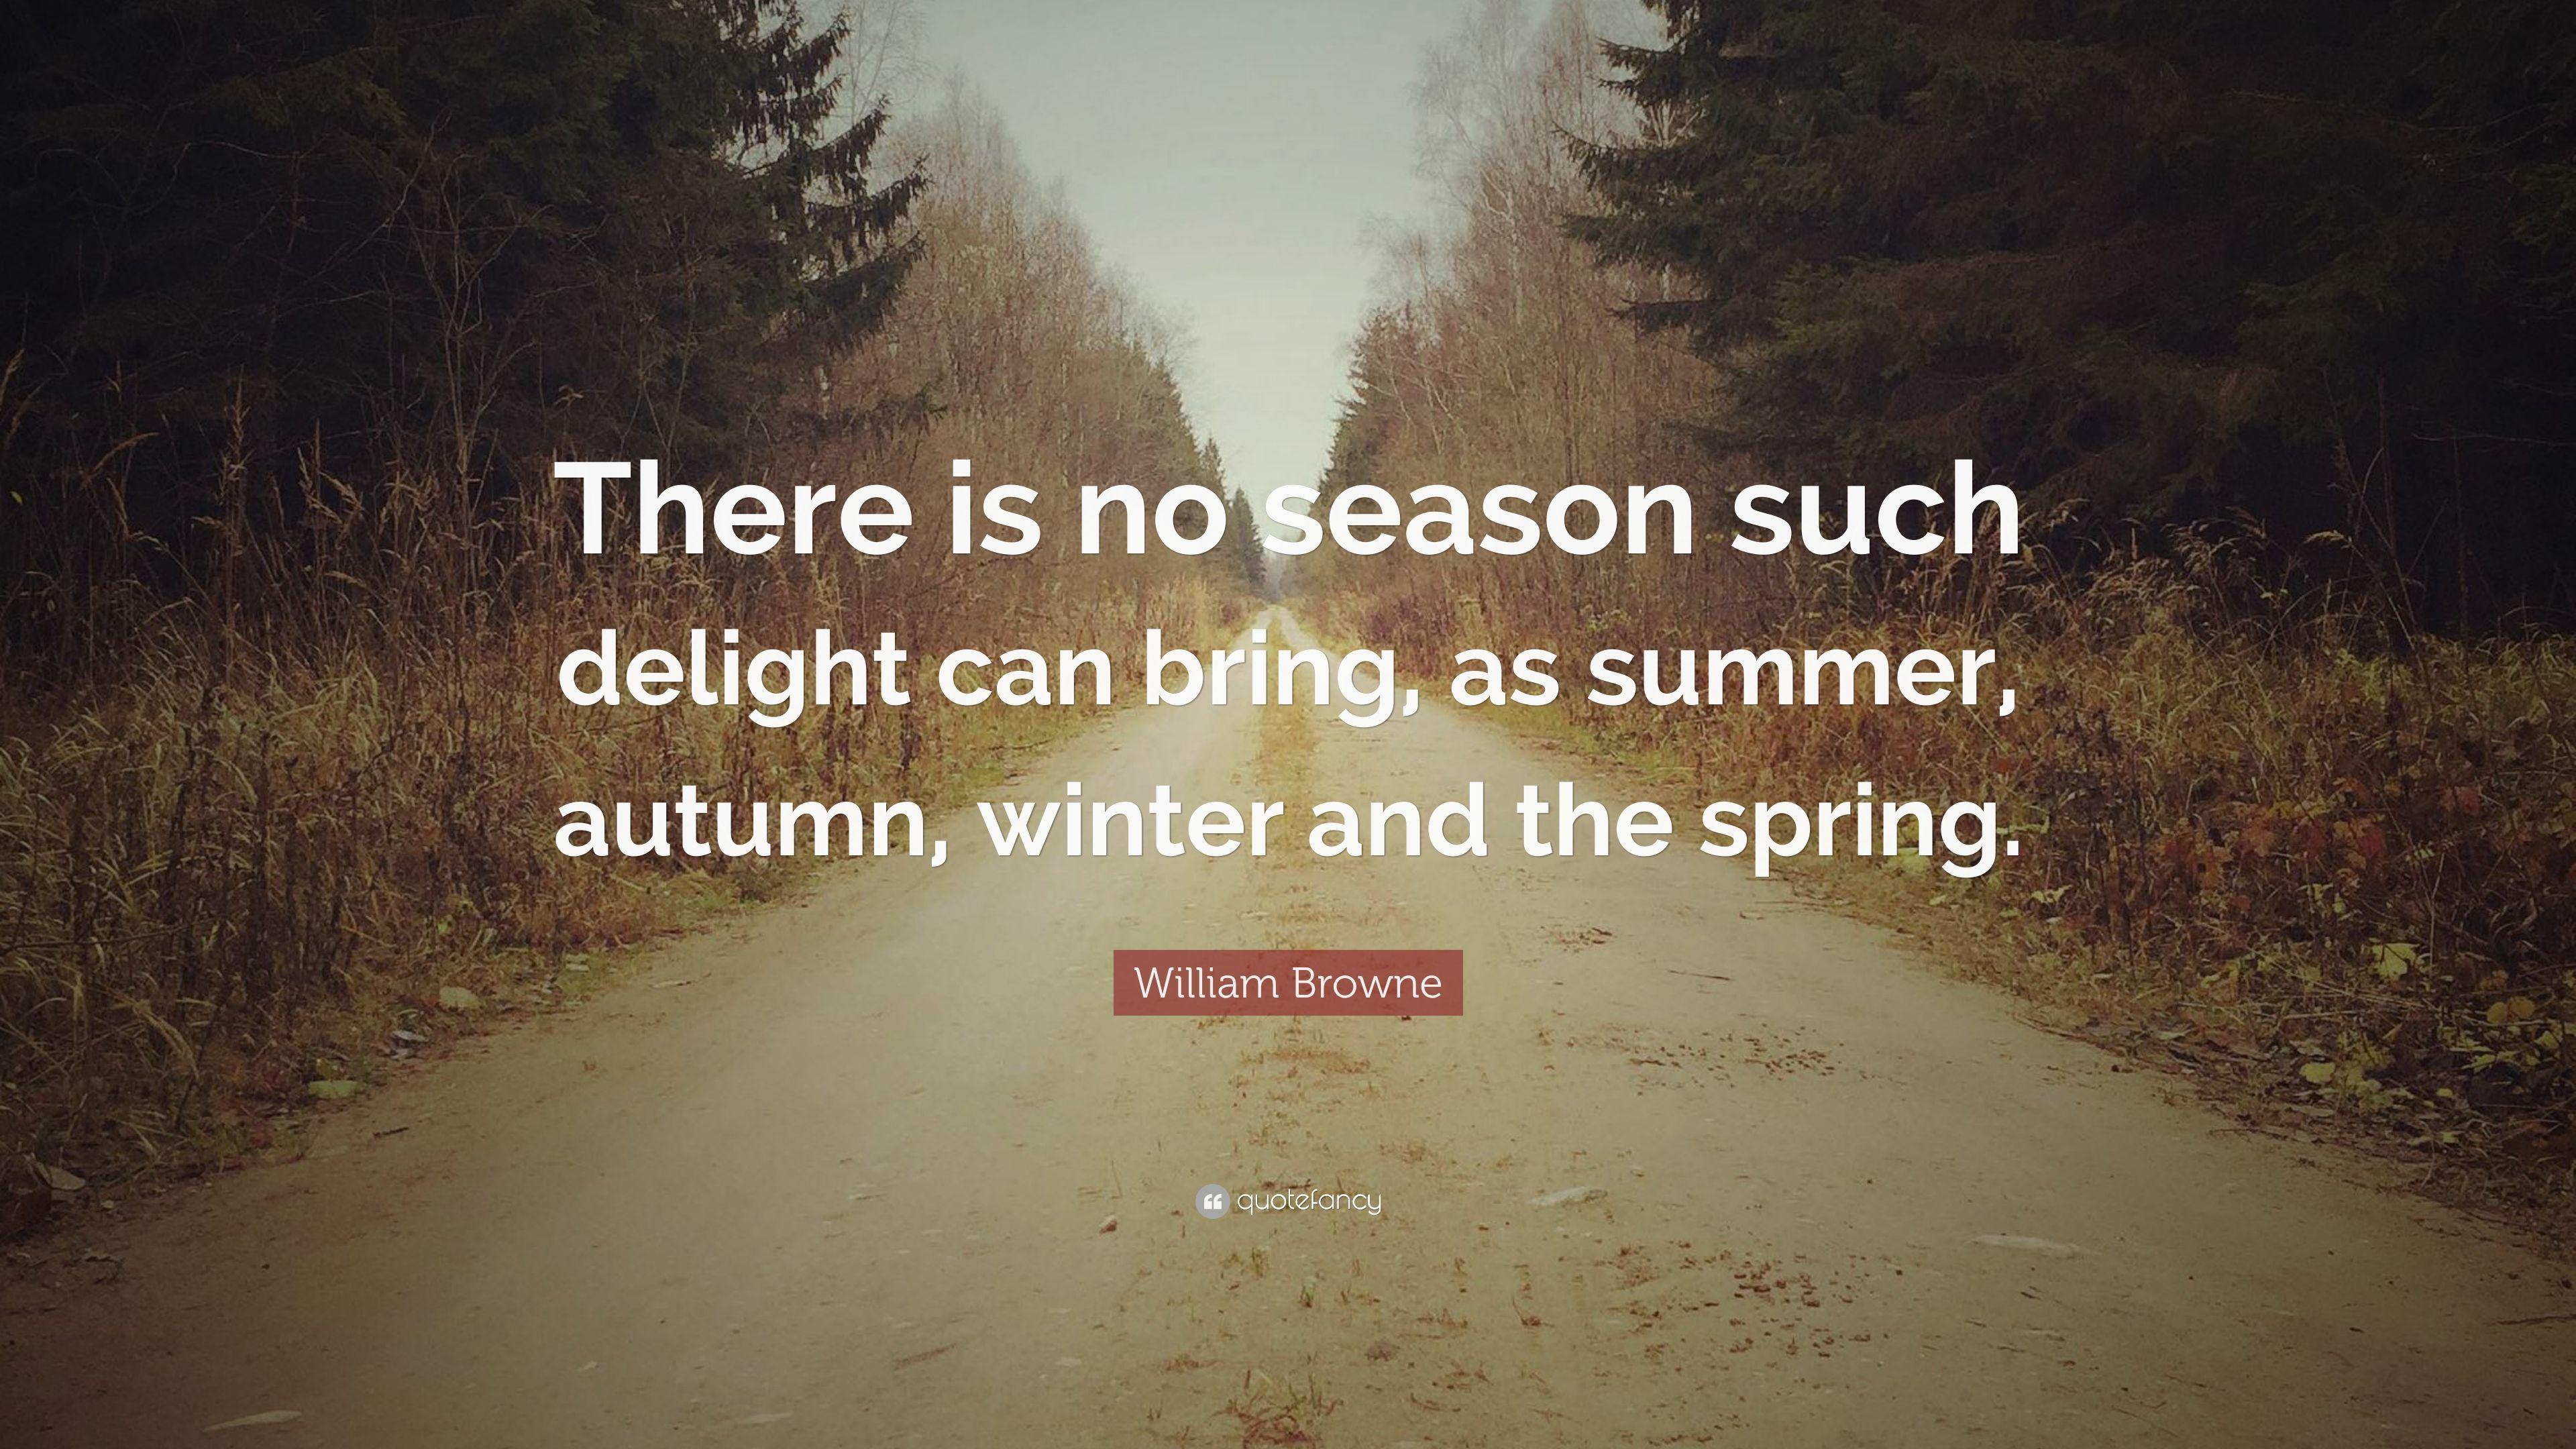 William Browne Quote: “There is no season such delight can bring, as